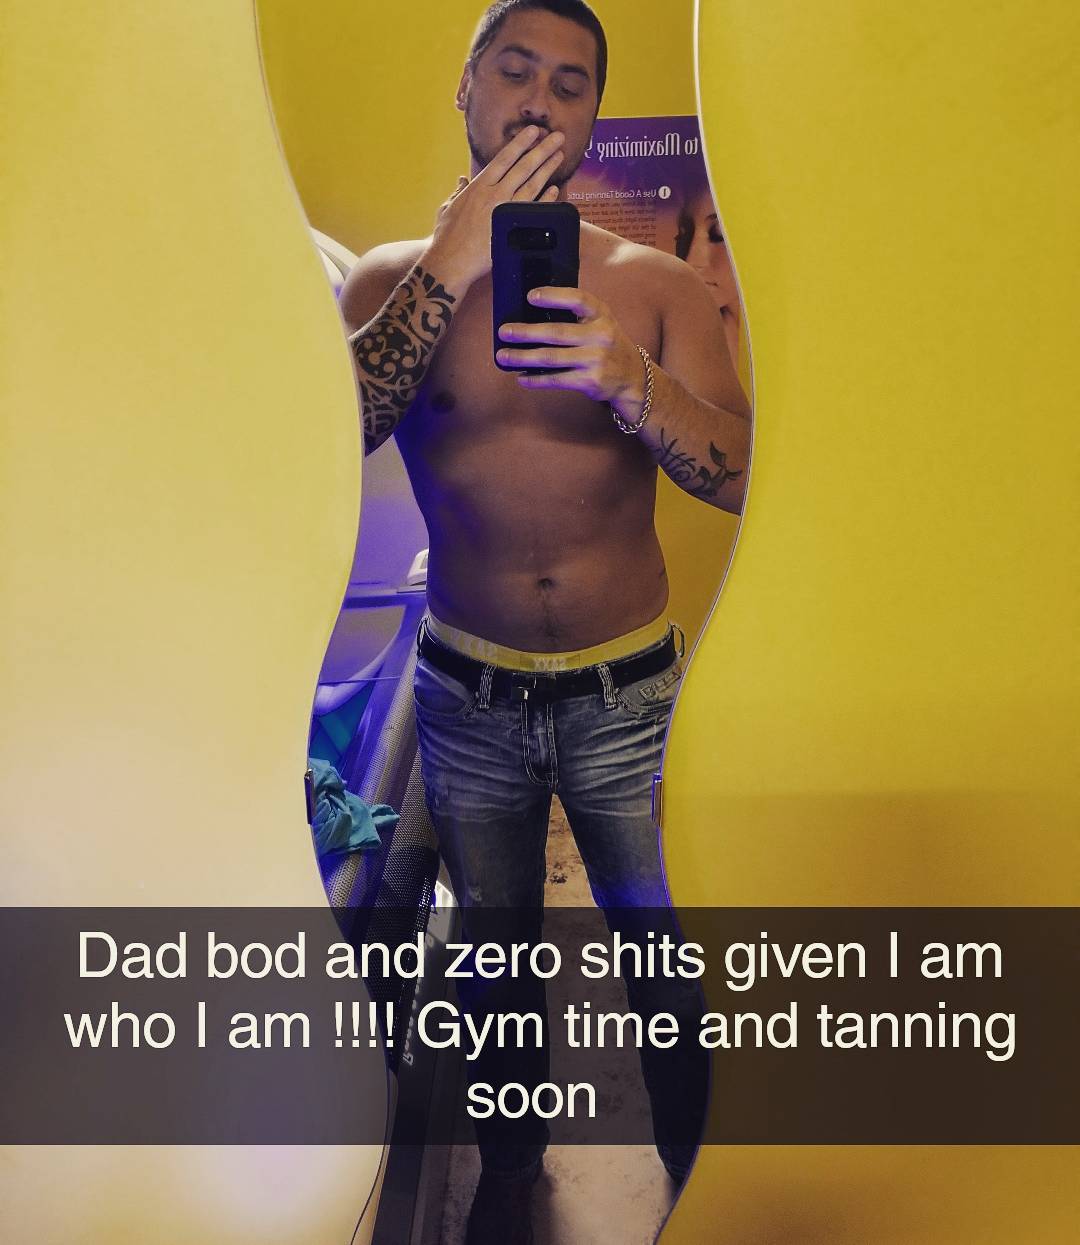 See Teen Mom’s buffest dads featuring Tyler Baltierra, Cory Wharton and Cole DeBoer as reality stars hit the gym